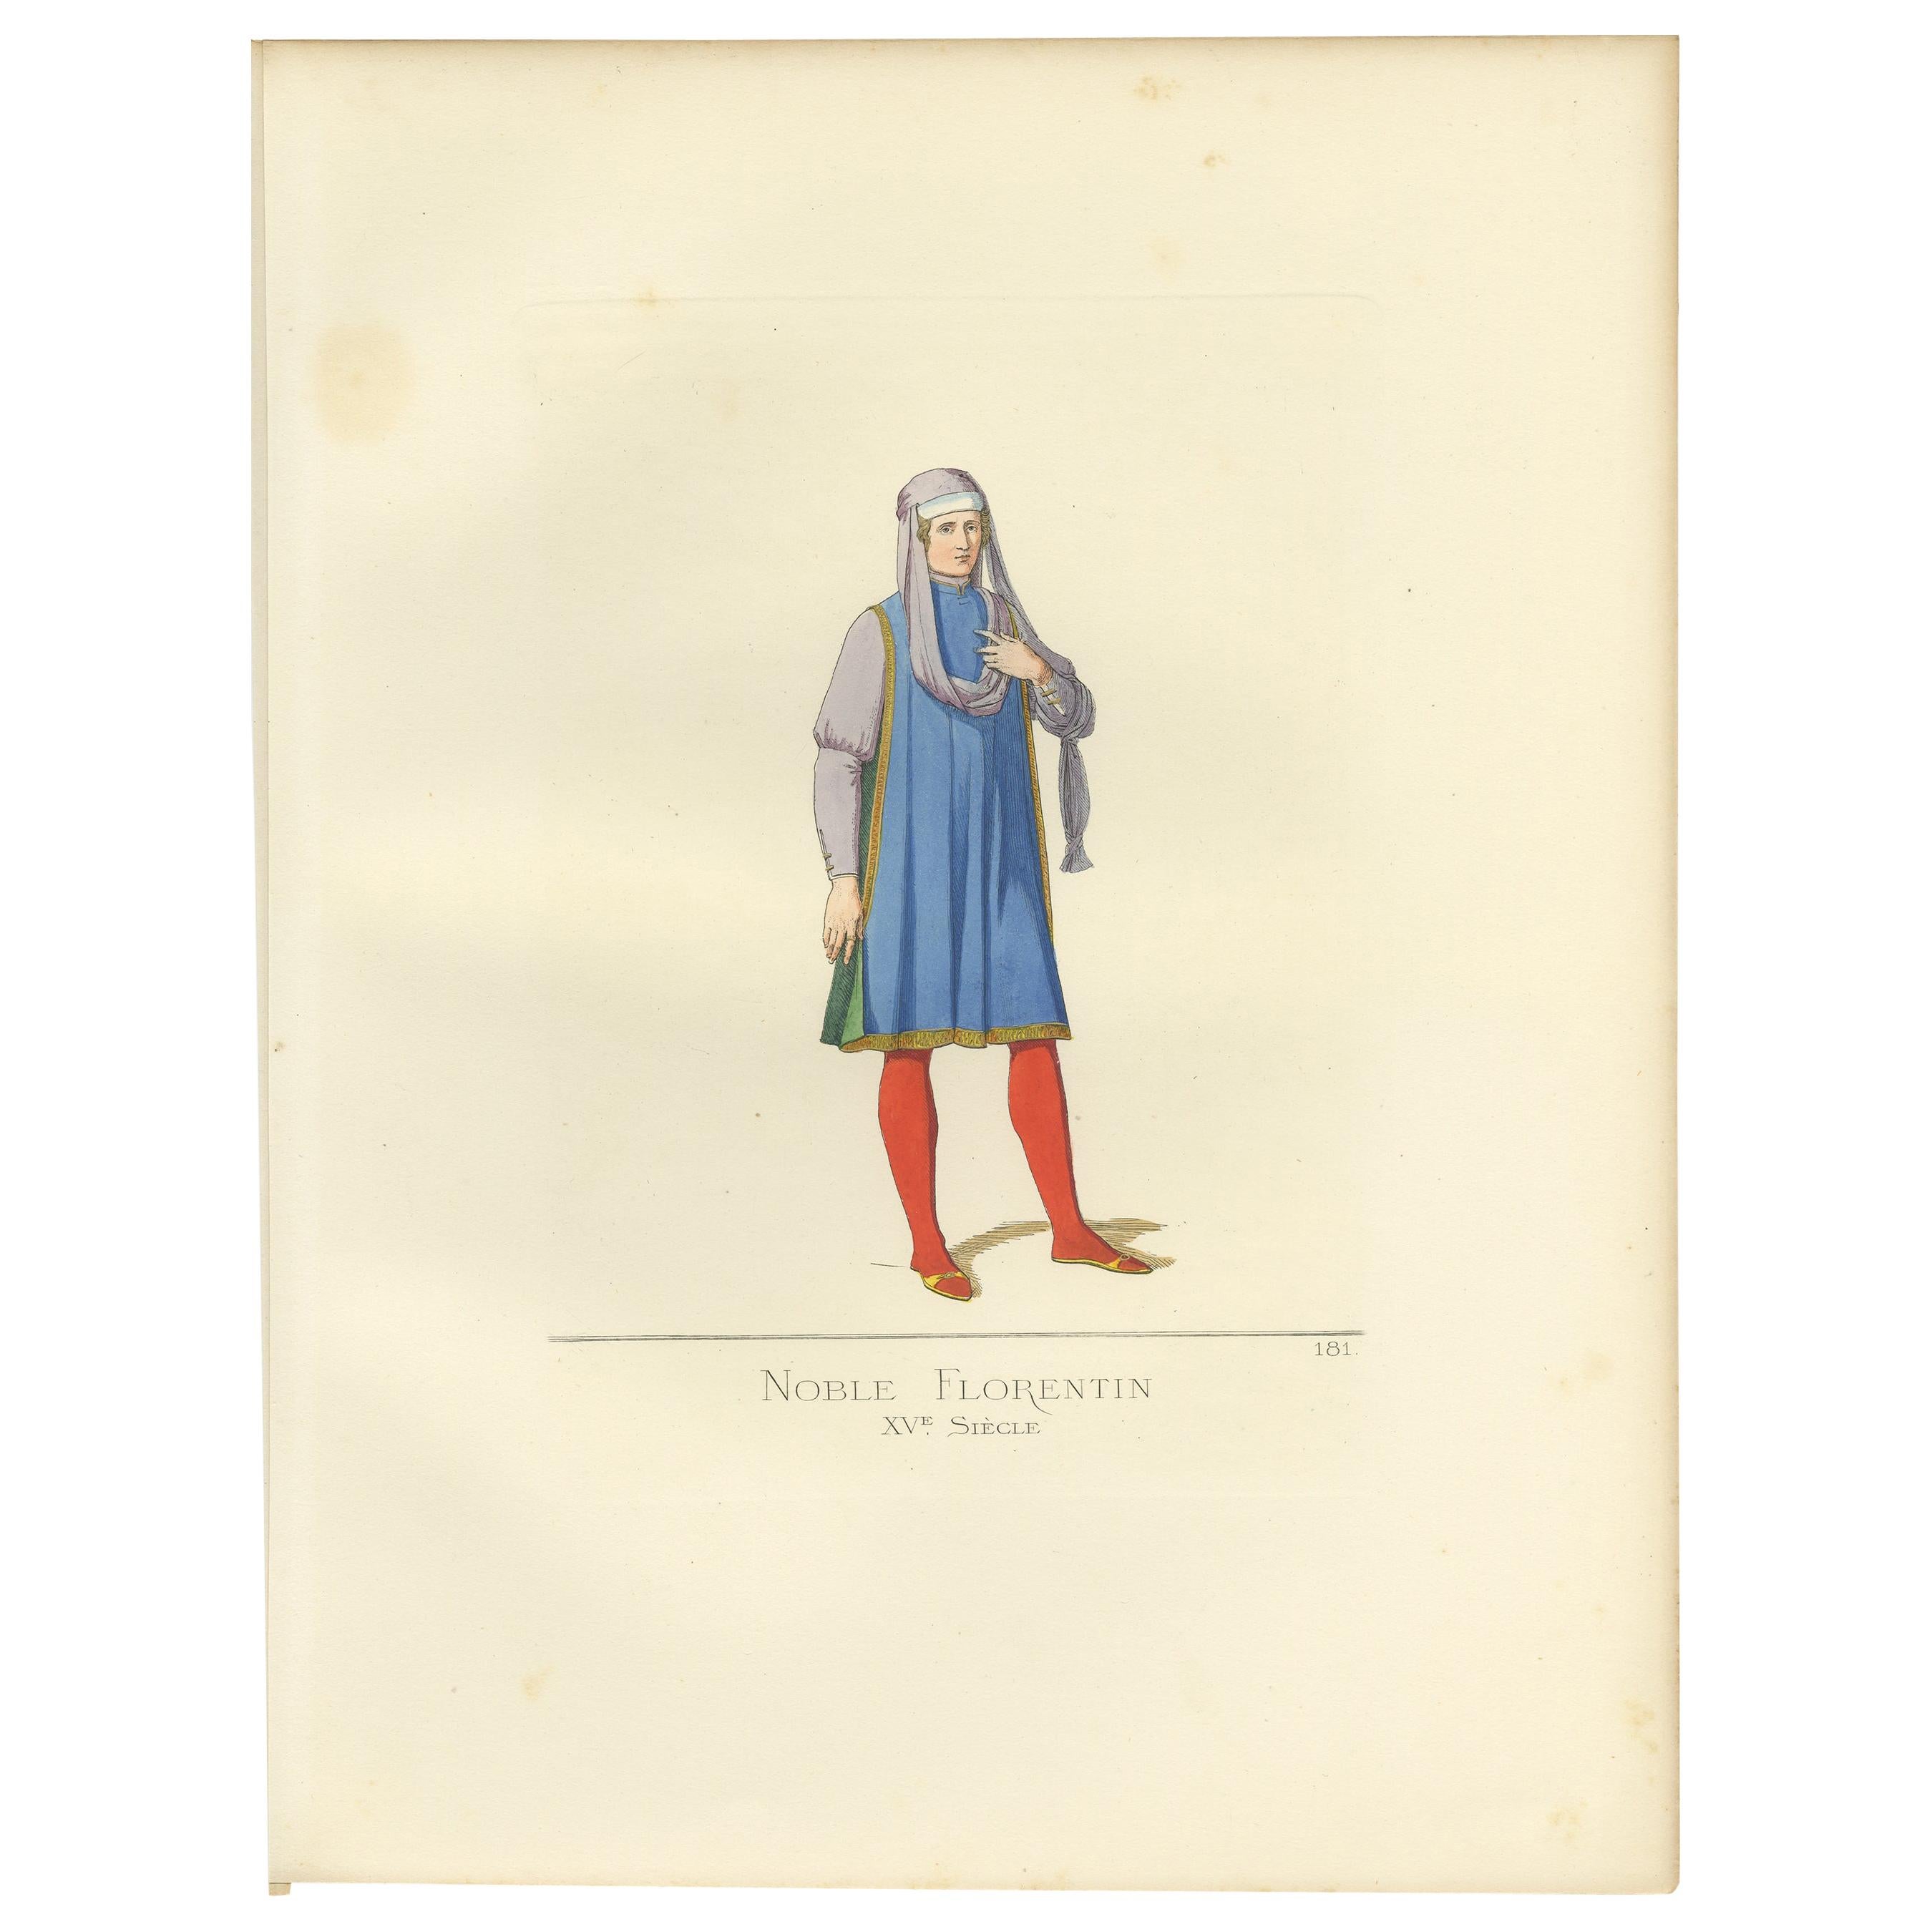 Antique Print of a Nobleman from Florence, 15th Century, by Bonnard, 1860